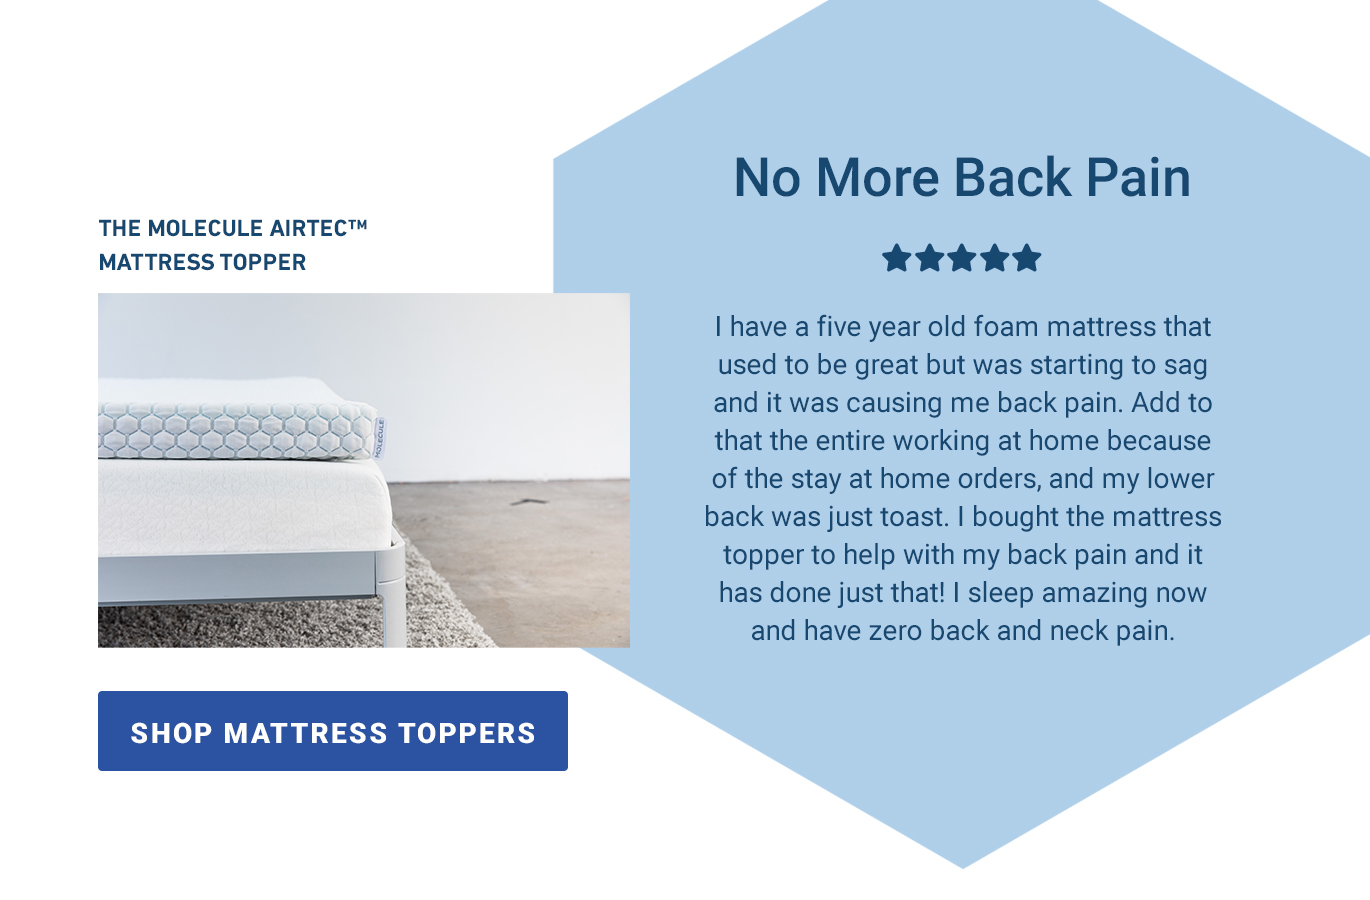 I have a five year old IKEA foam mattress that used to be great but was starting to sag and it was causing me back pain. Add to that the entire working at home because of the stay at home orders, and my lower back was just toast. I bought the mattress topper to help with my back pain and it has done just that! I sleep amazing now and have zero back and neck pain. [SHOP MATTRESS TOPPERS]